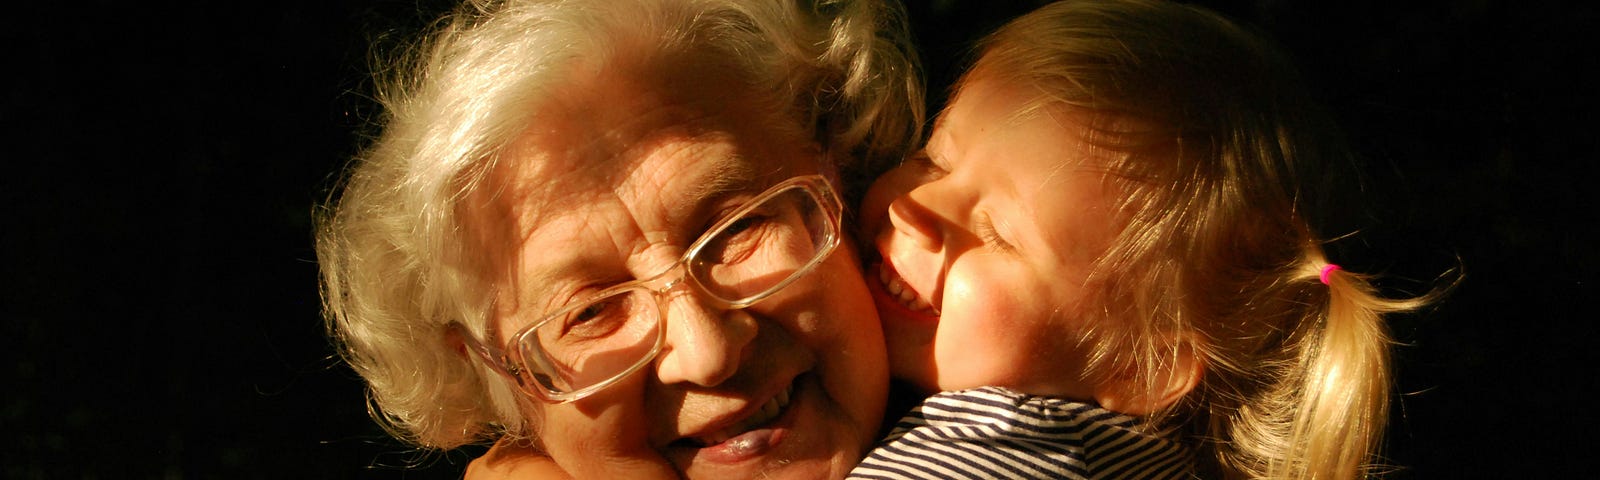 A little girl wildly hugging her grandmother.